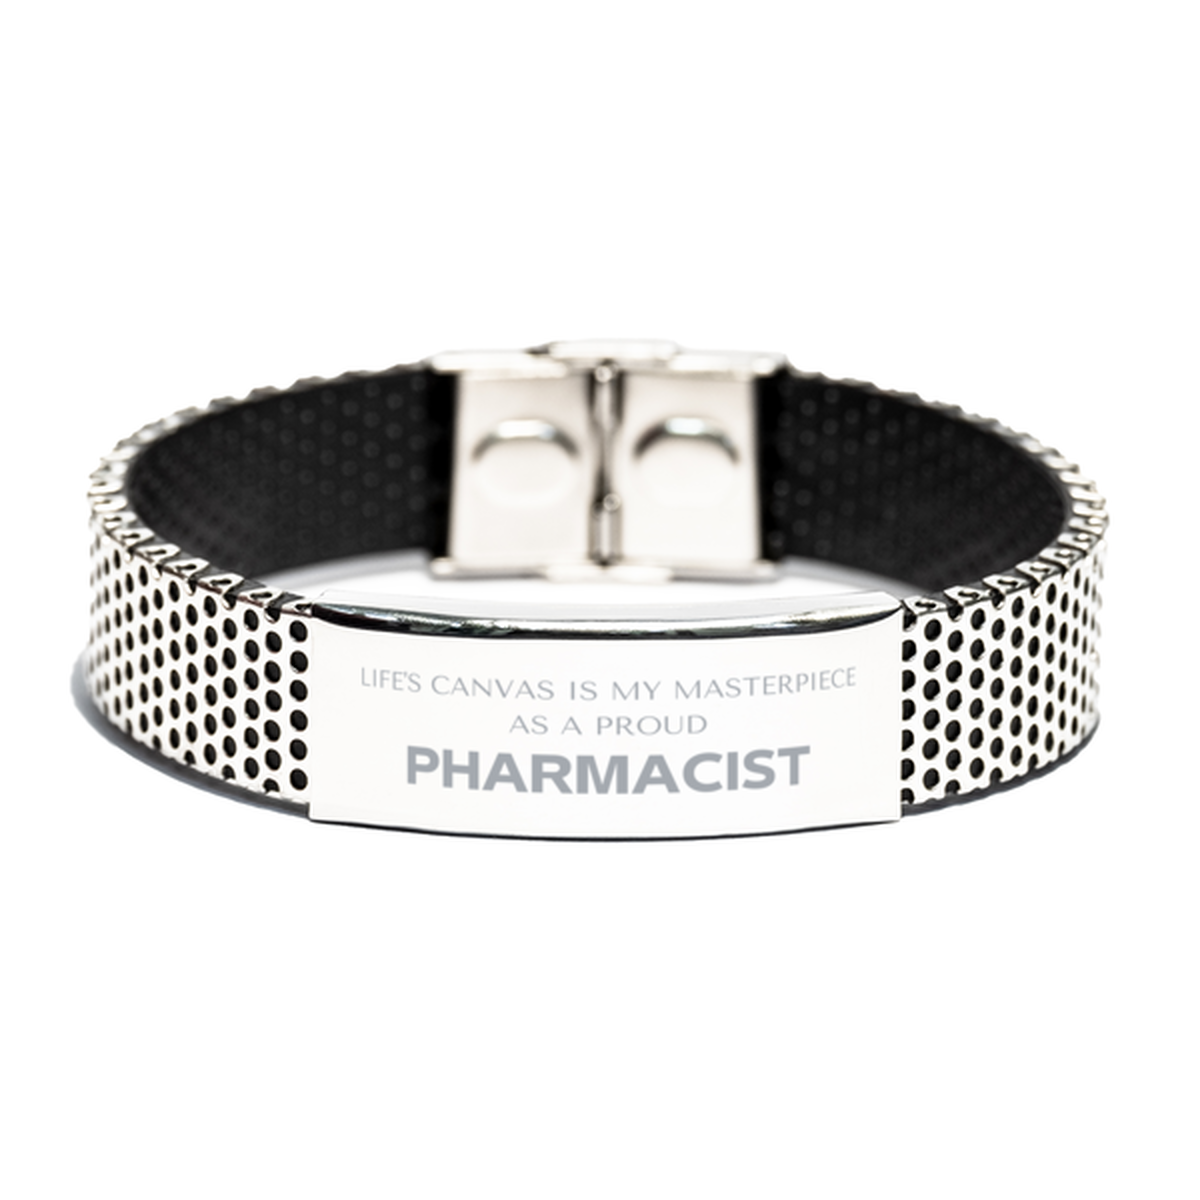 Proud Pharmacist Gifts, Life's canvas is my masterpiece, Epic Birthday Christmas Unique Stainless Steel Bracelet For Pharmacist, Coworkers, Men, Women, Friends